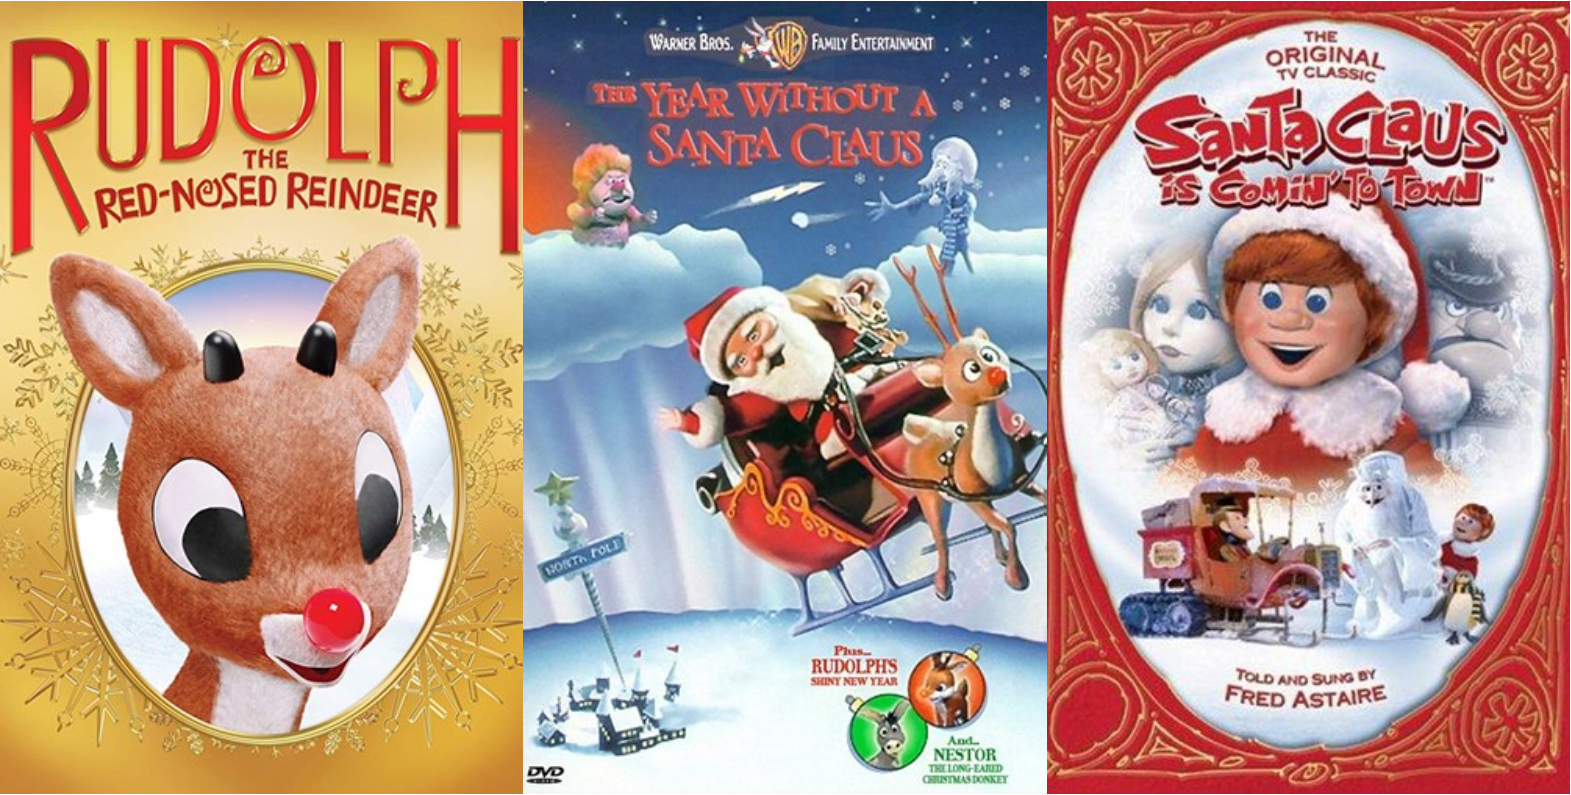 Cover images for "Rudolph the Red-Nosed Reindeer," "The Year Without a Santa Claus," and "Santa Claus is Coming to Town."